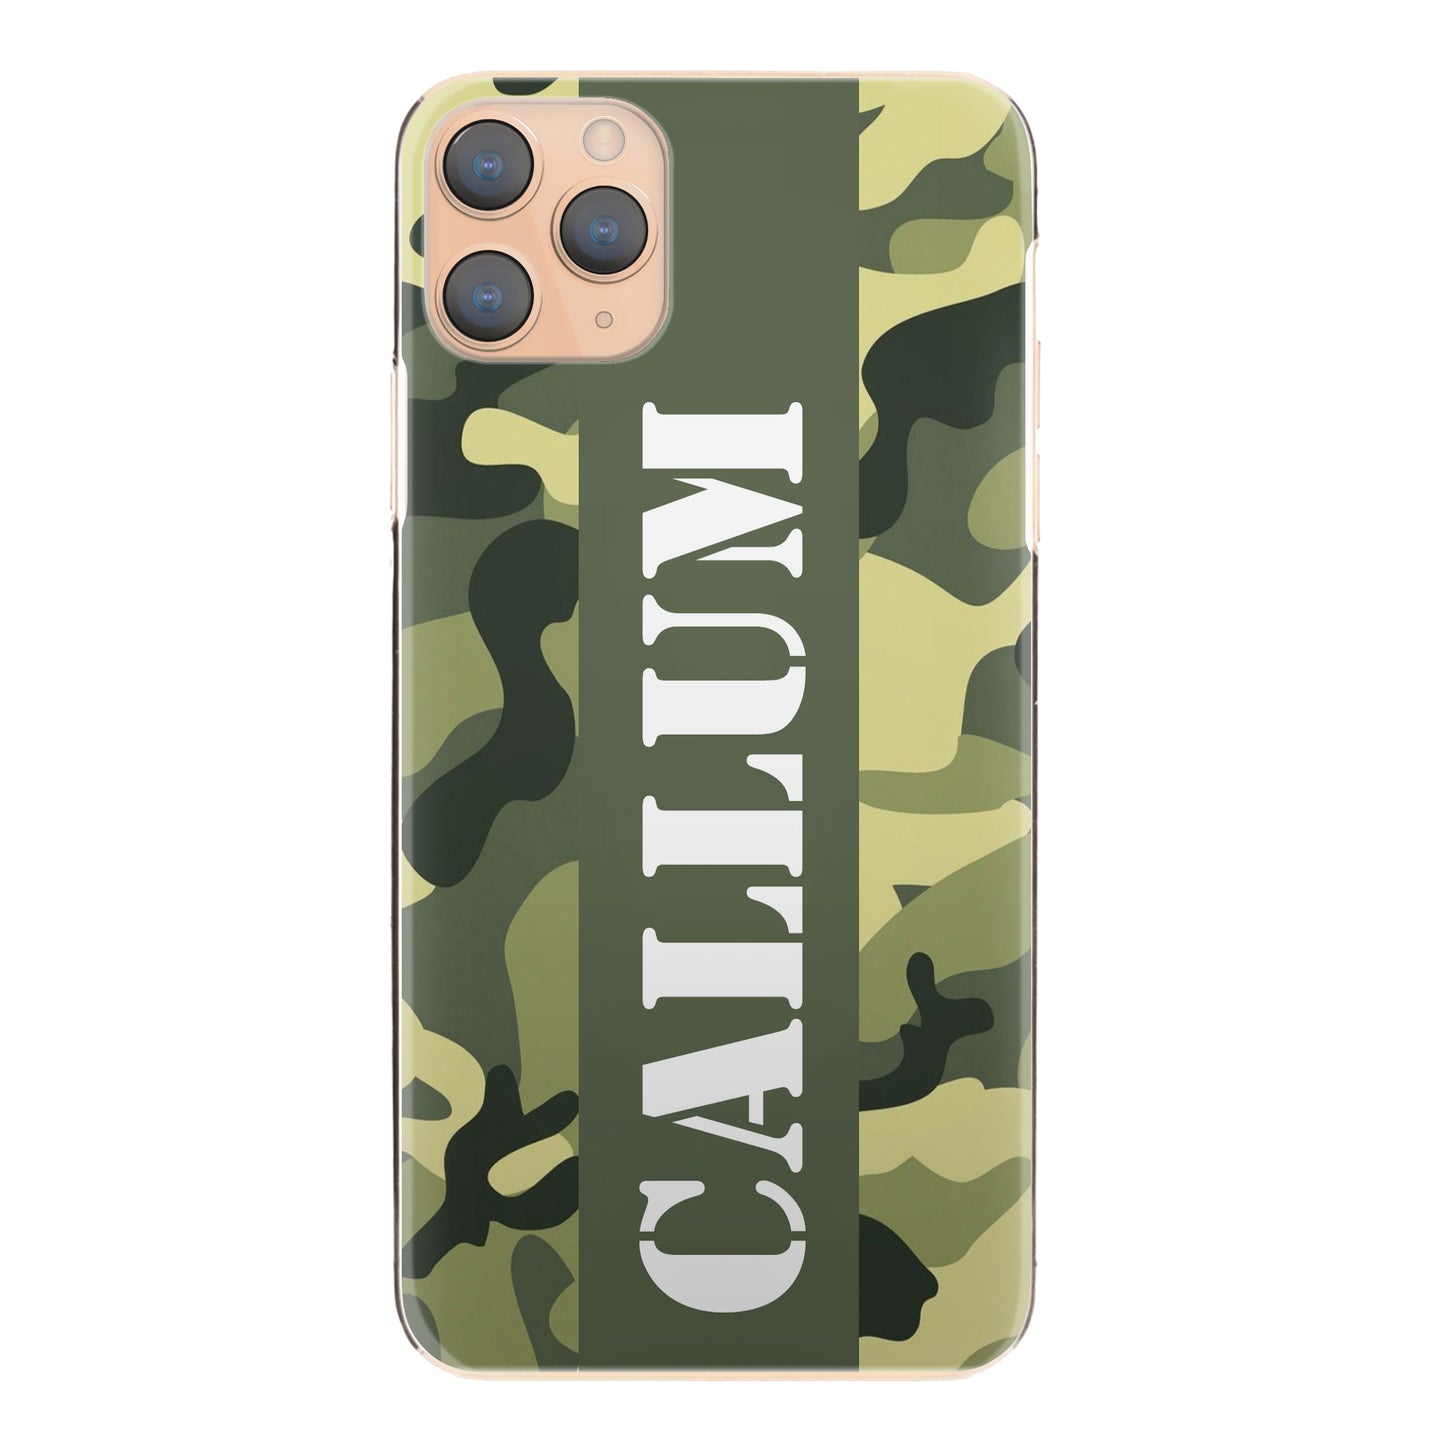 Personalised Motorola Phone Hard Case with Military Text on Classic Green Camo